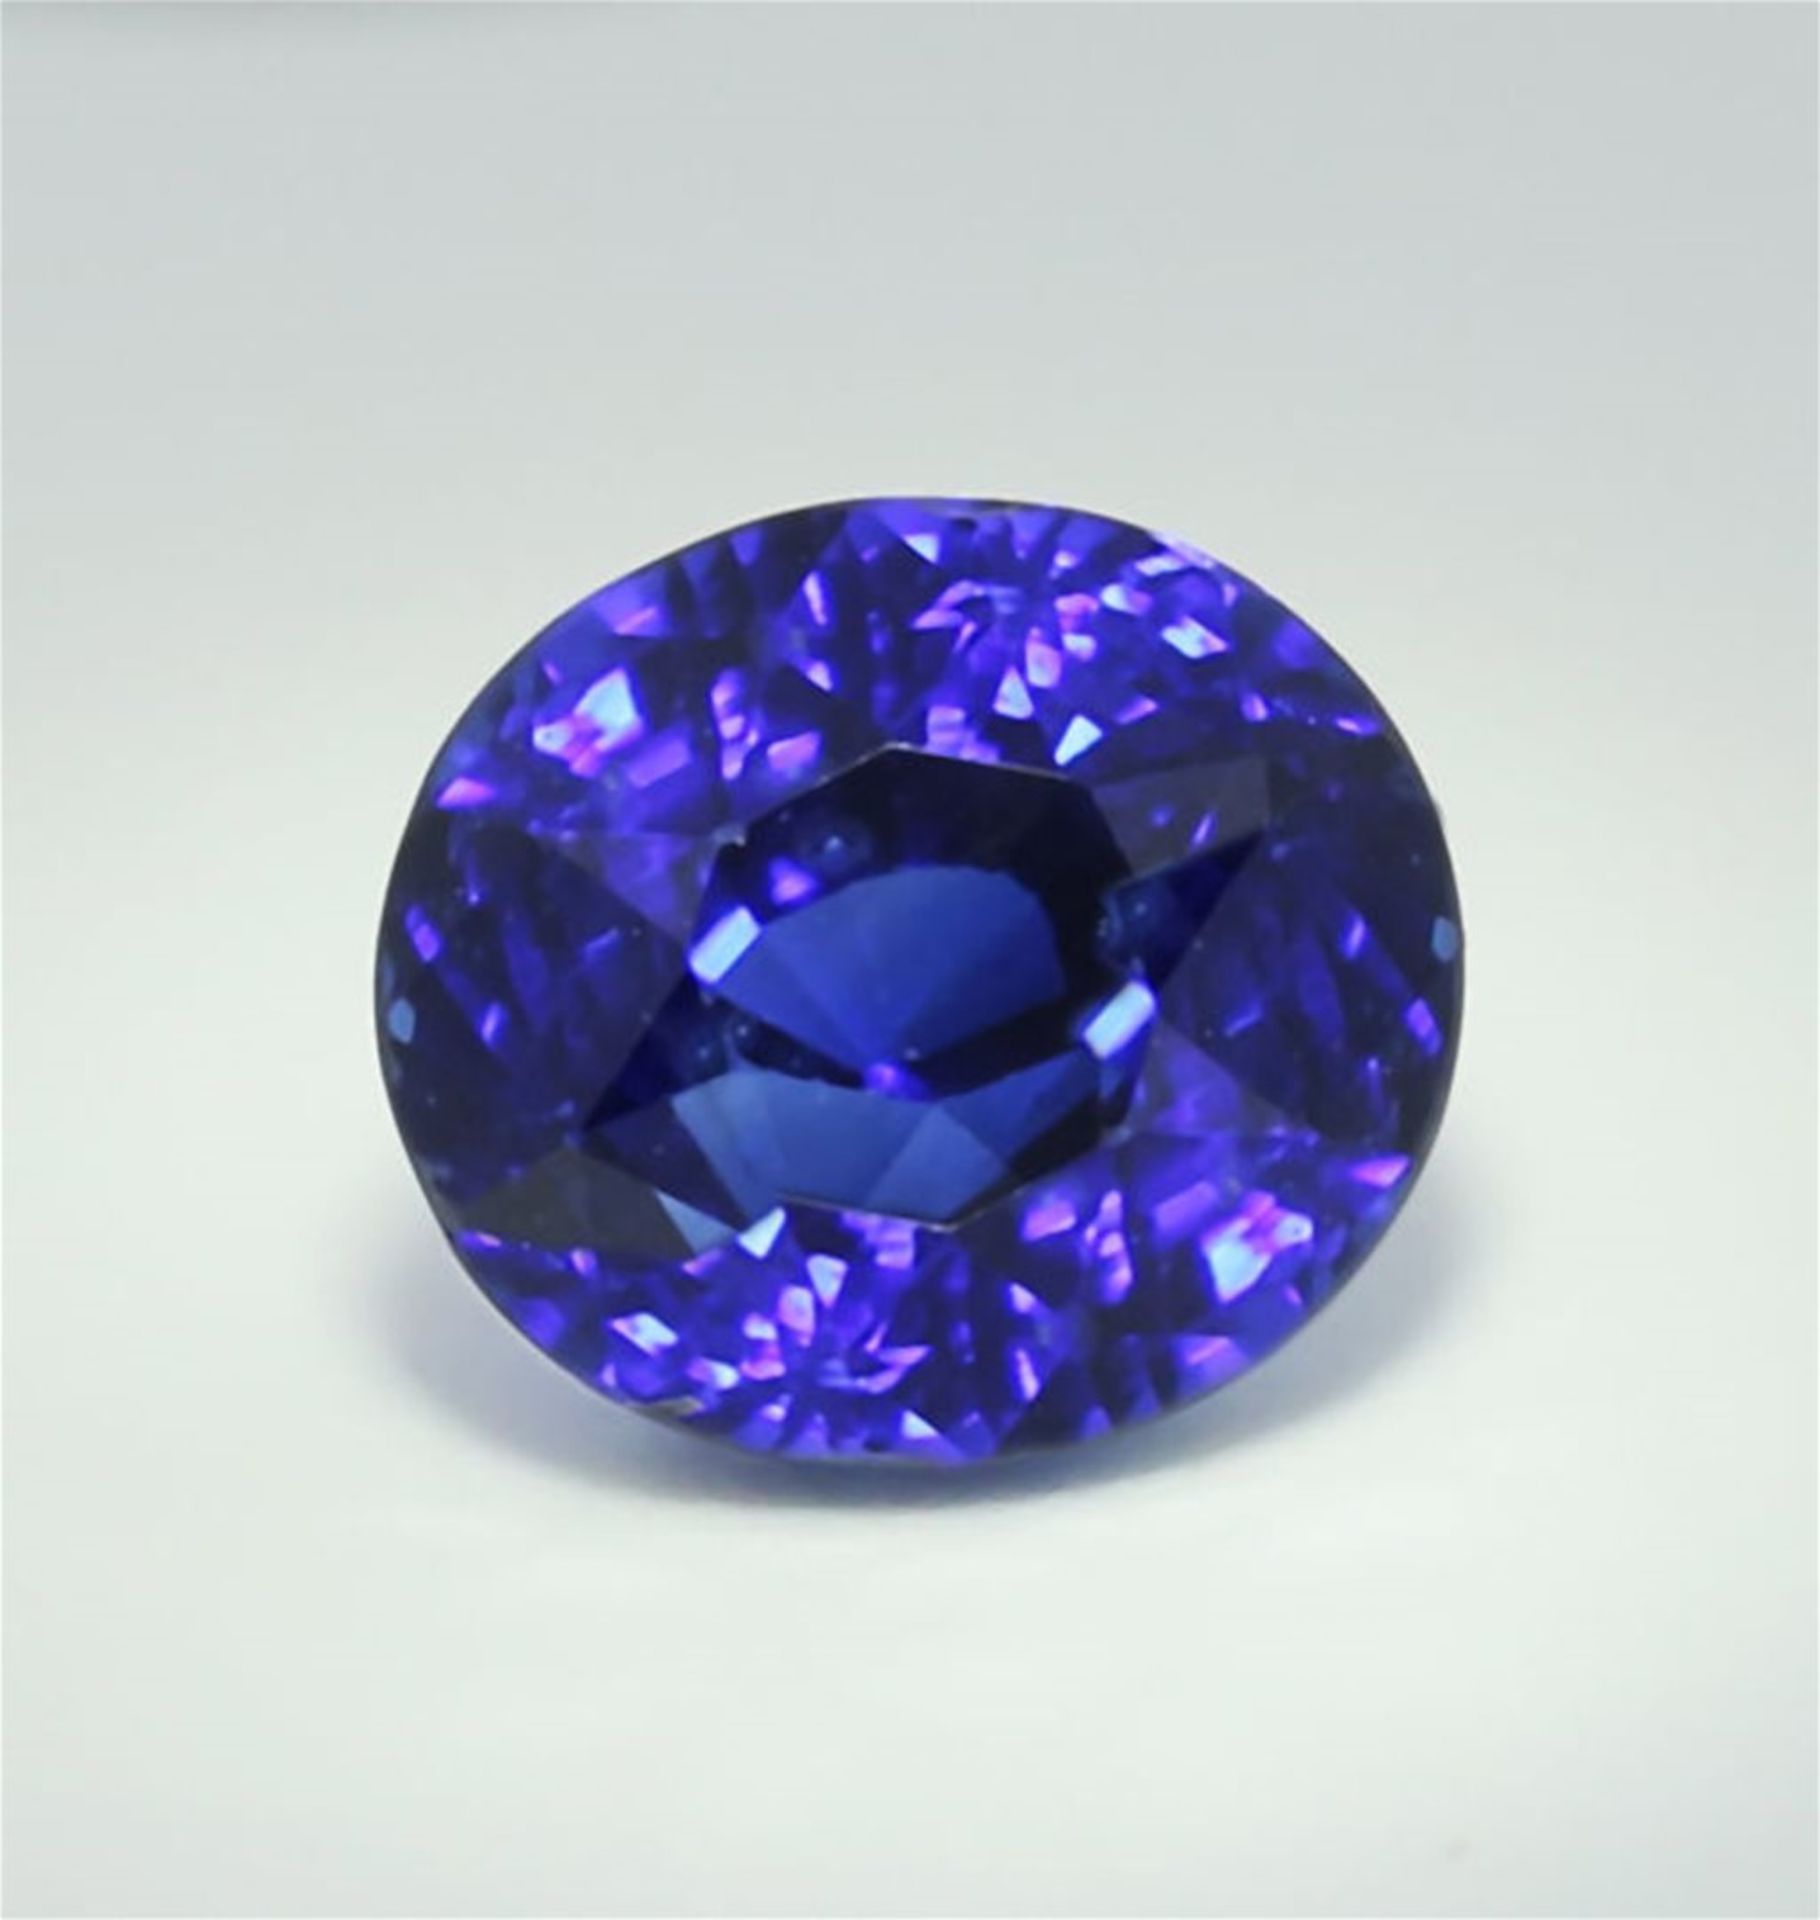 GRS Certified 2.55 ct. Blue Sapphire - Royal Blue - Image 4 of 8